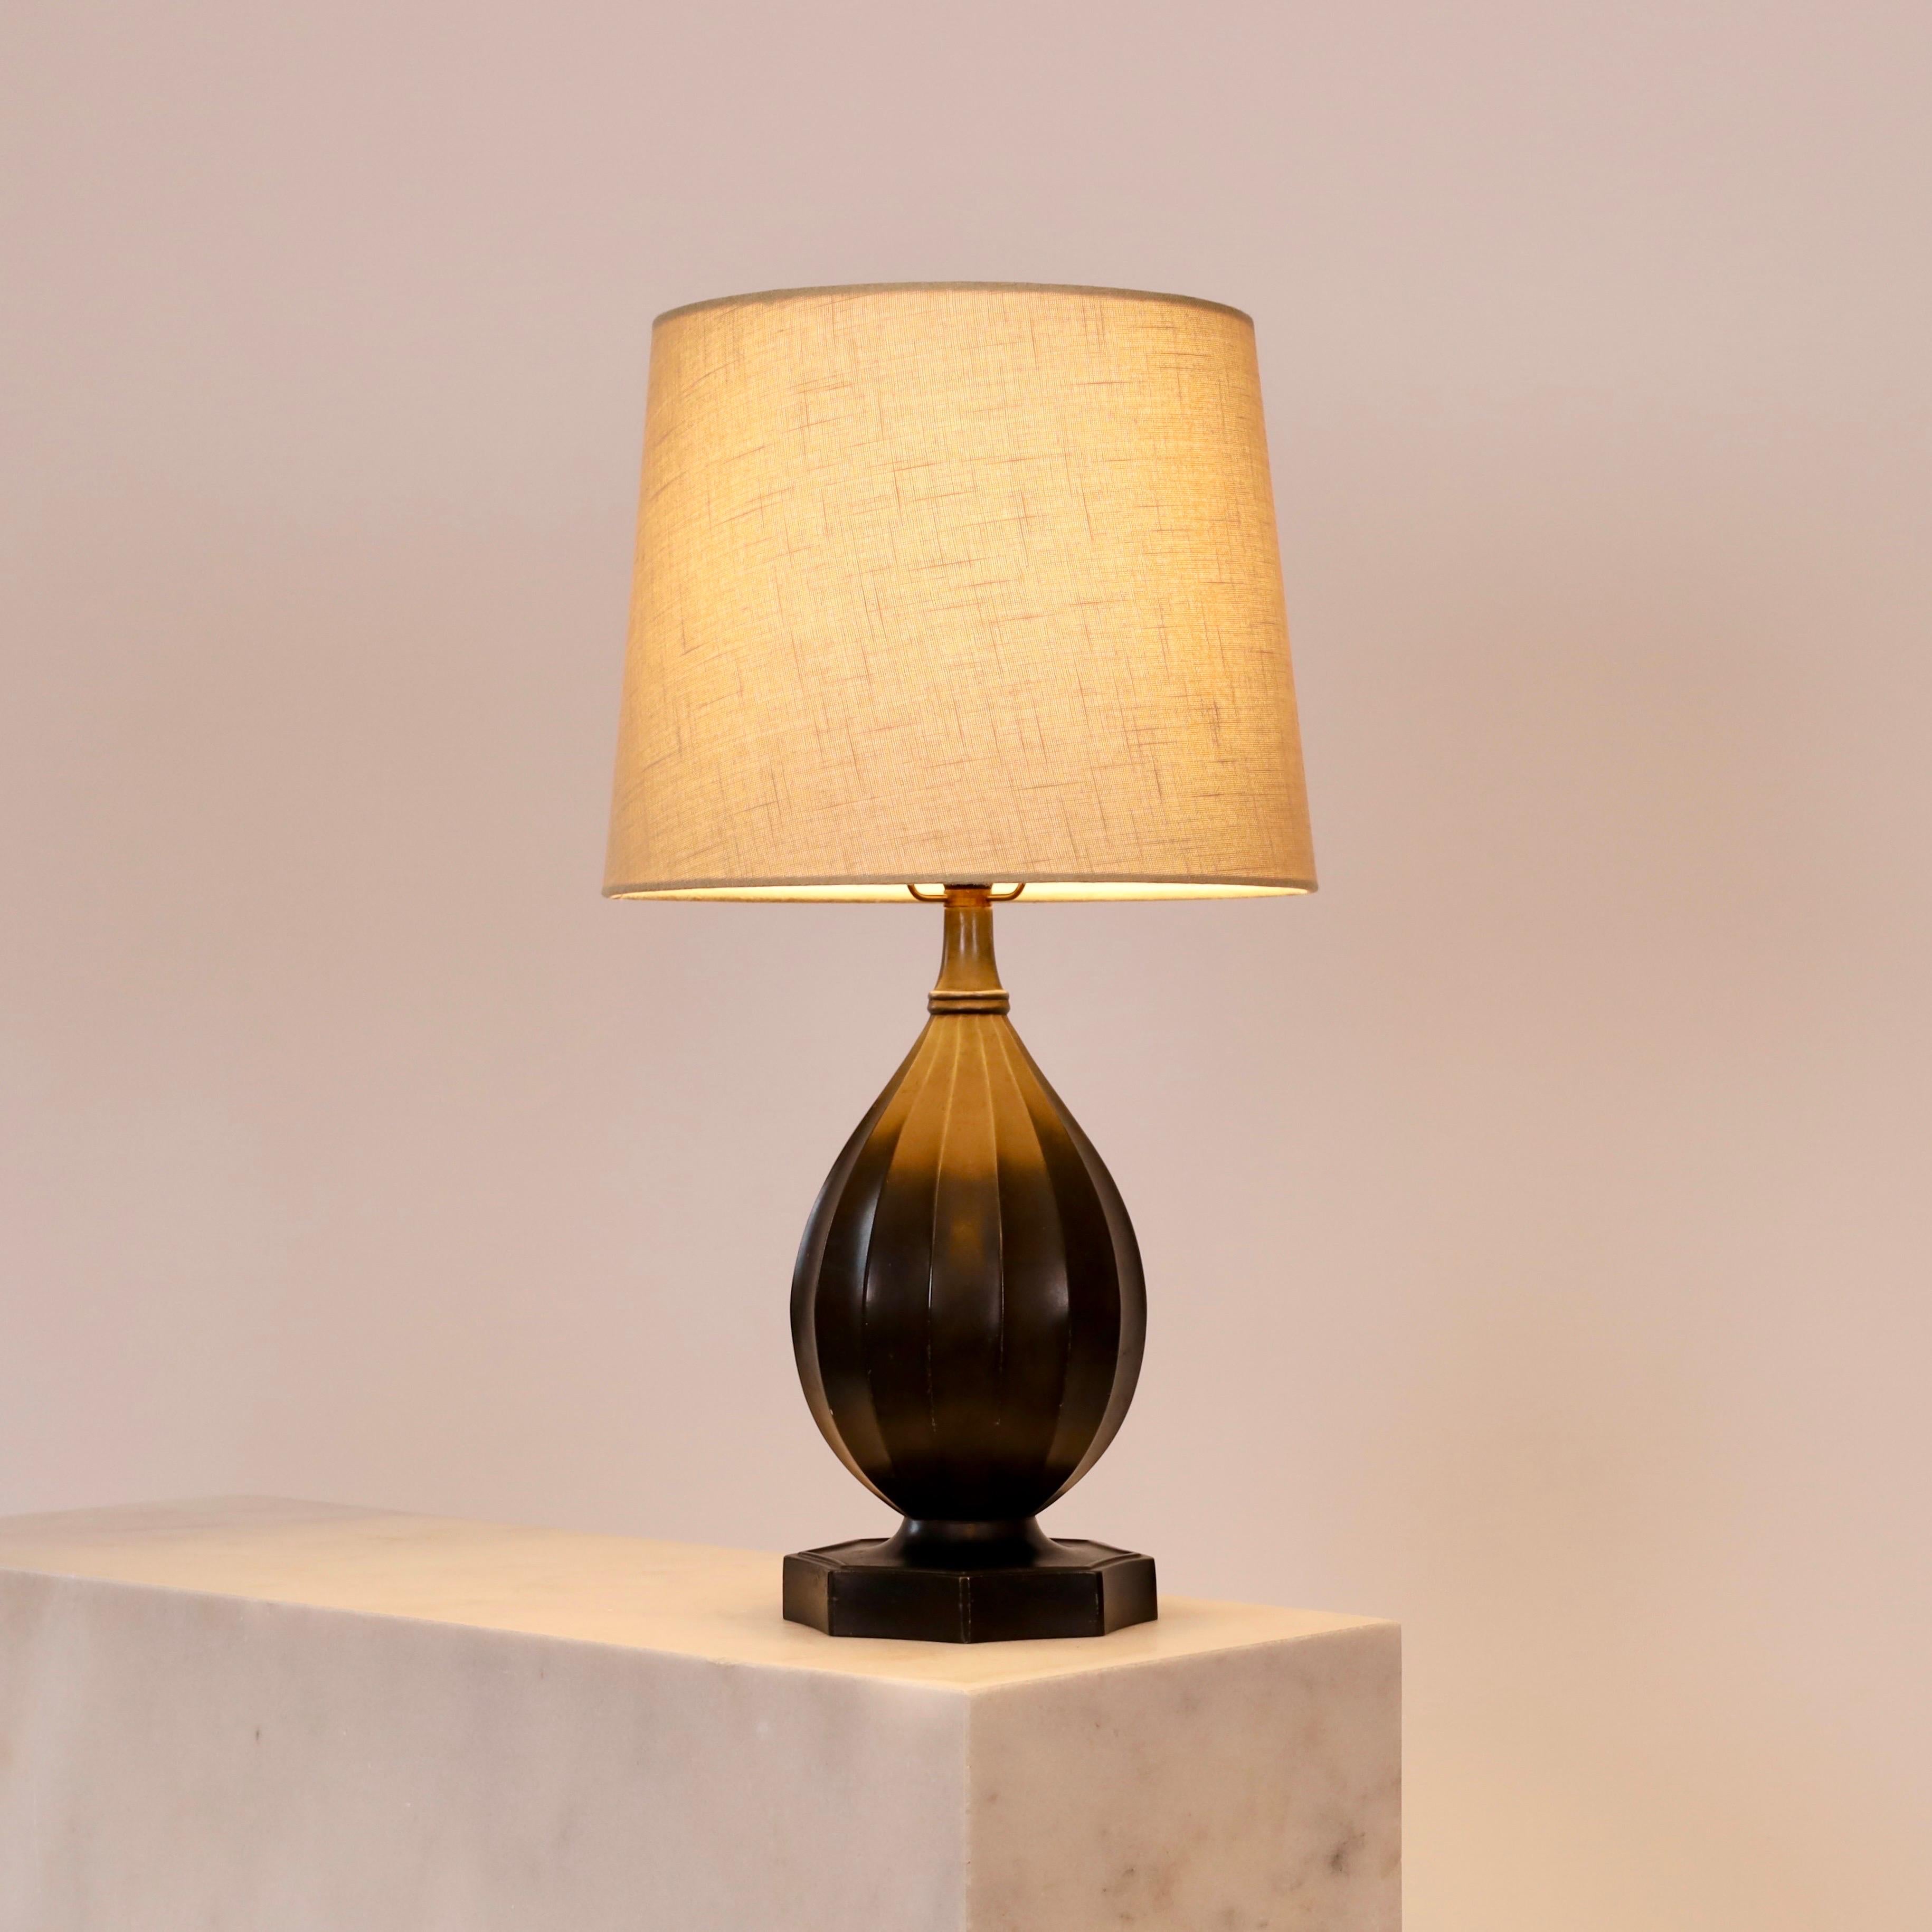 Exquisite Just Andersen Table Lamp, 1930s, Denmark In Good Condition For Sale In Værløse, DK